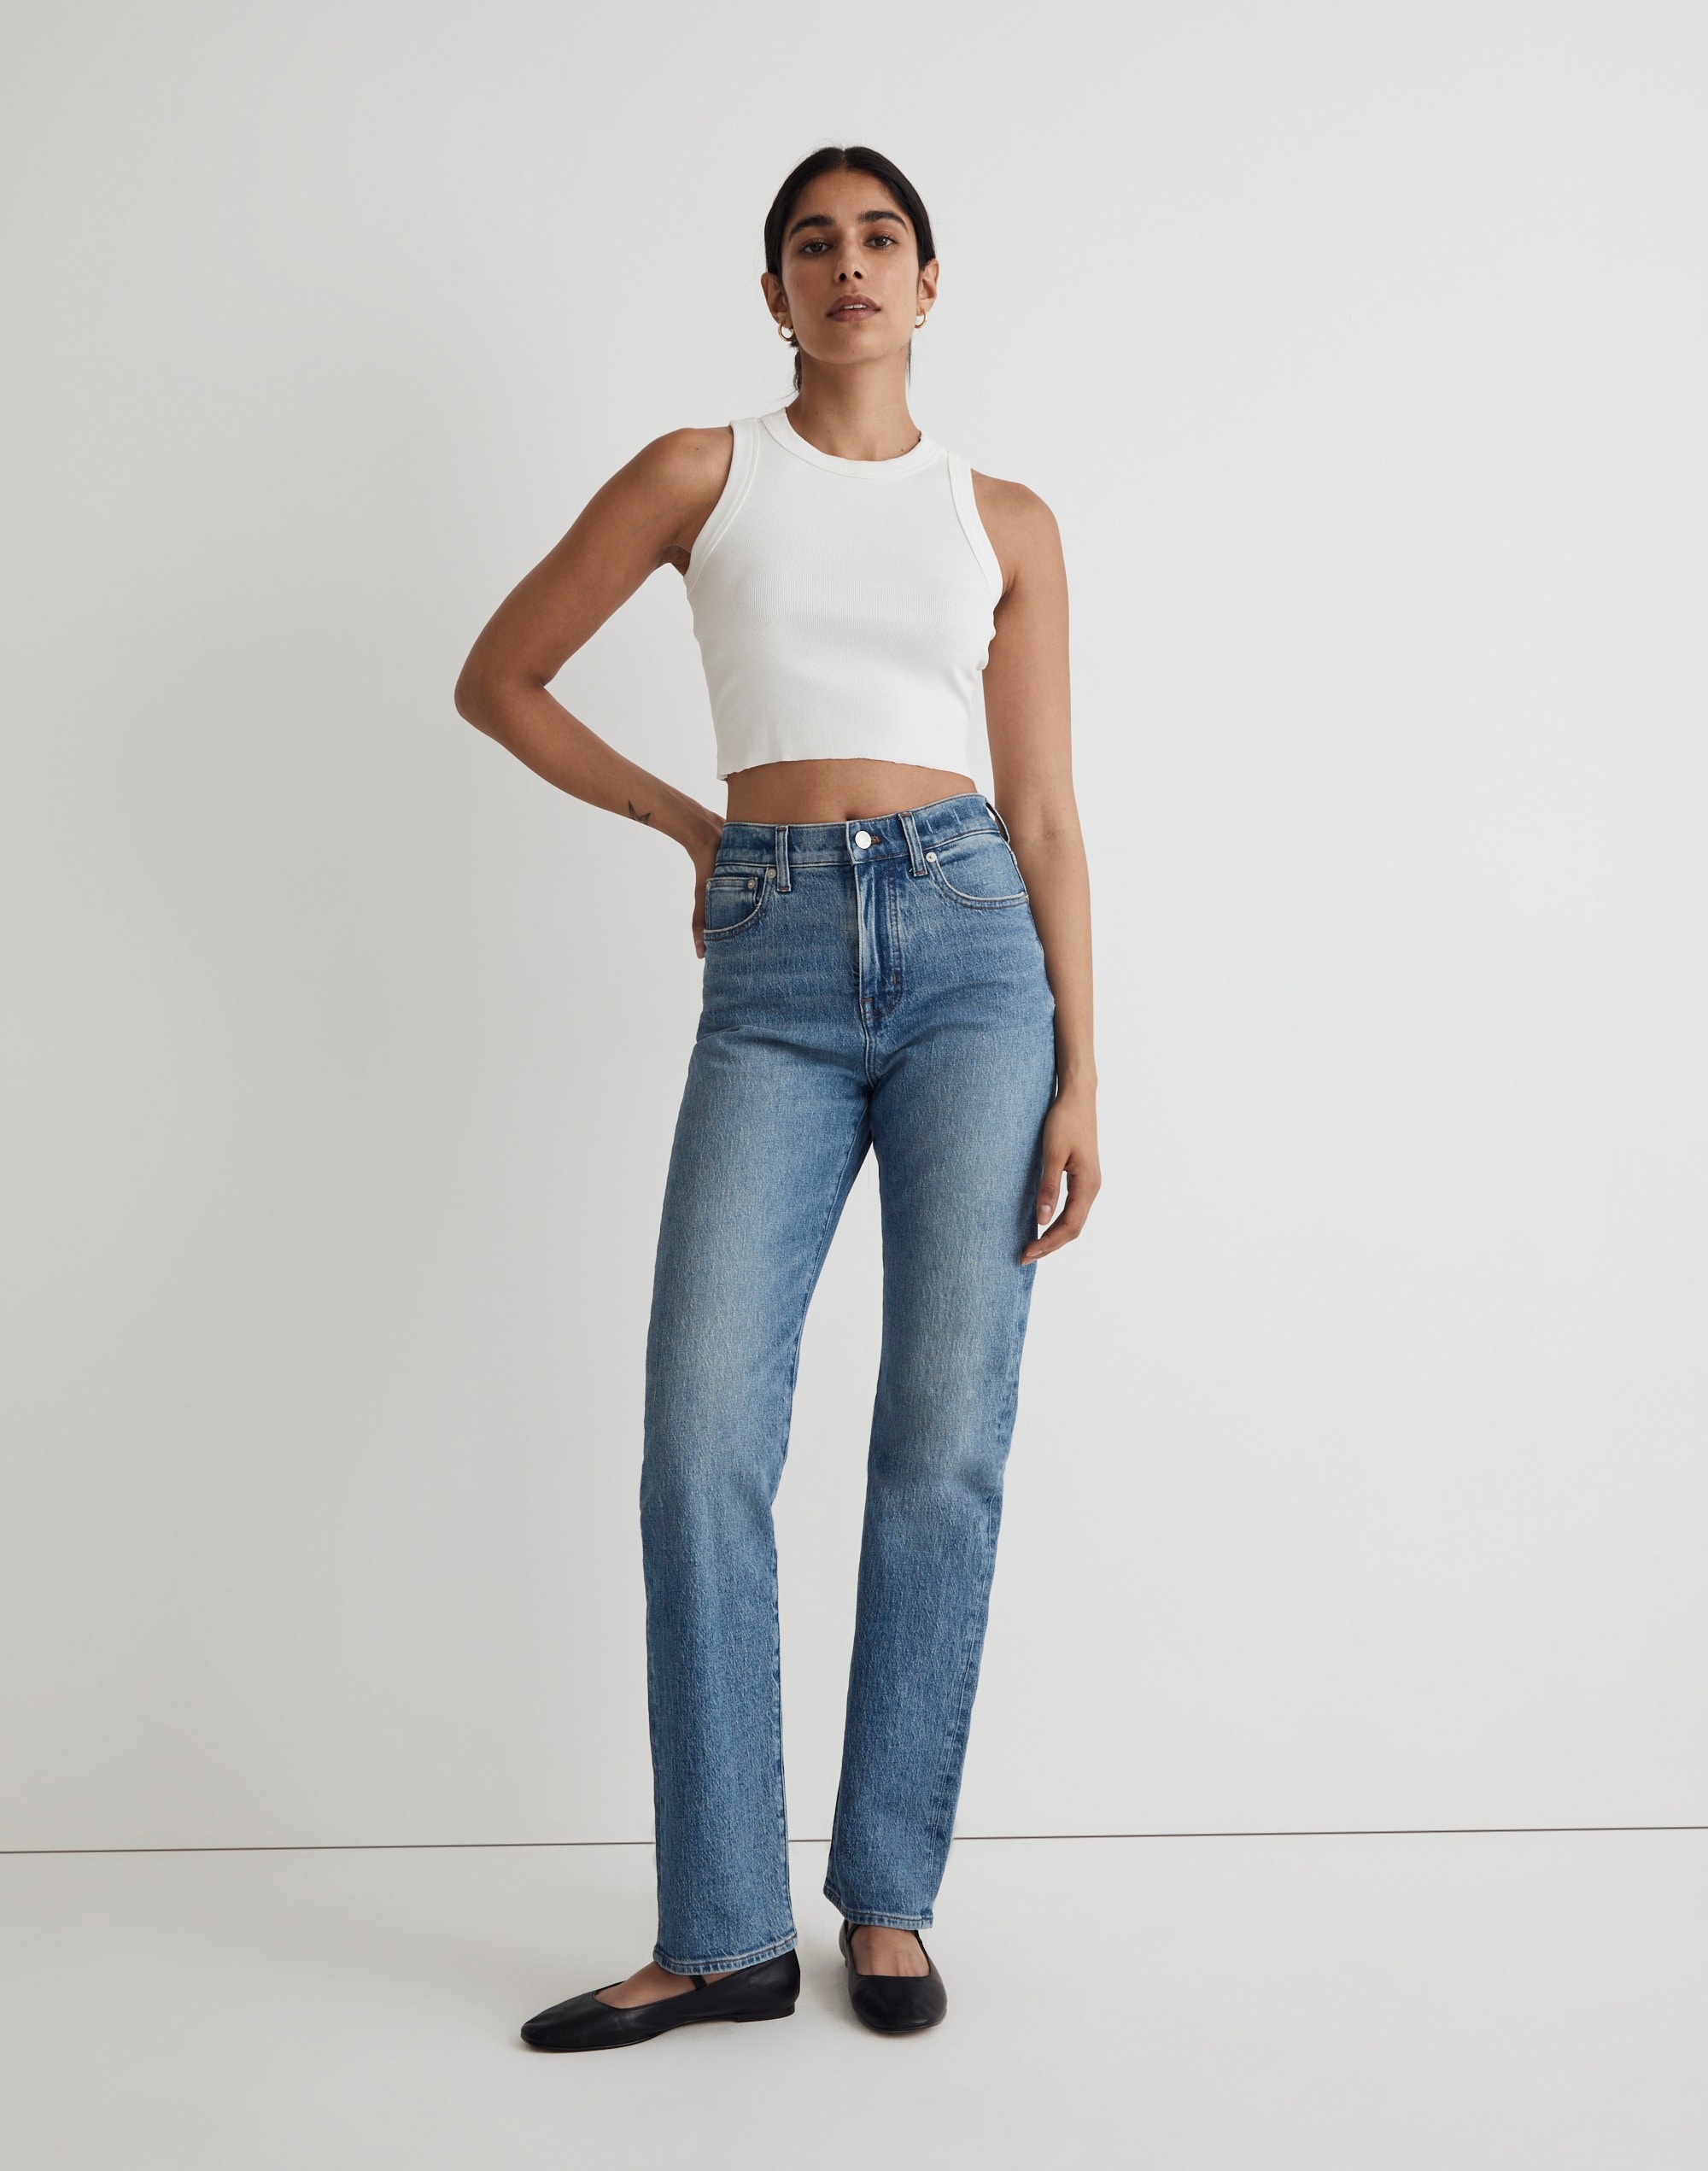 The '90s Straight Jean in Enmore Wash